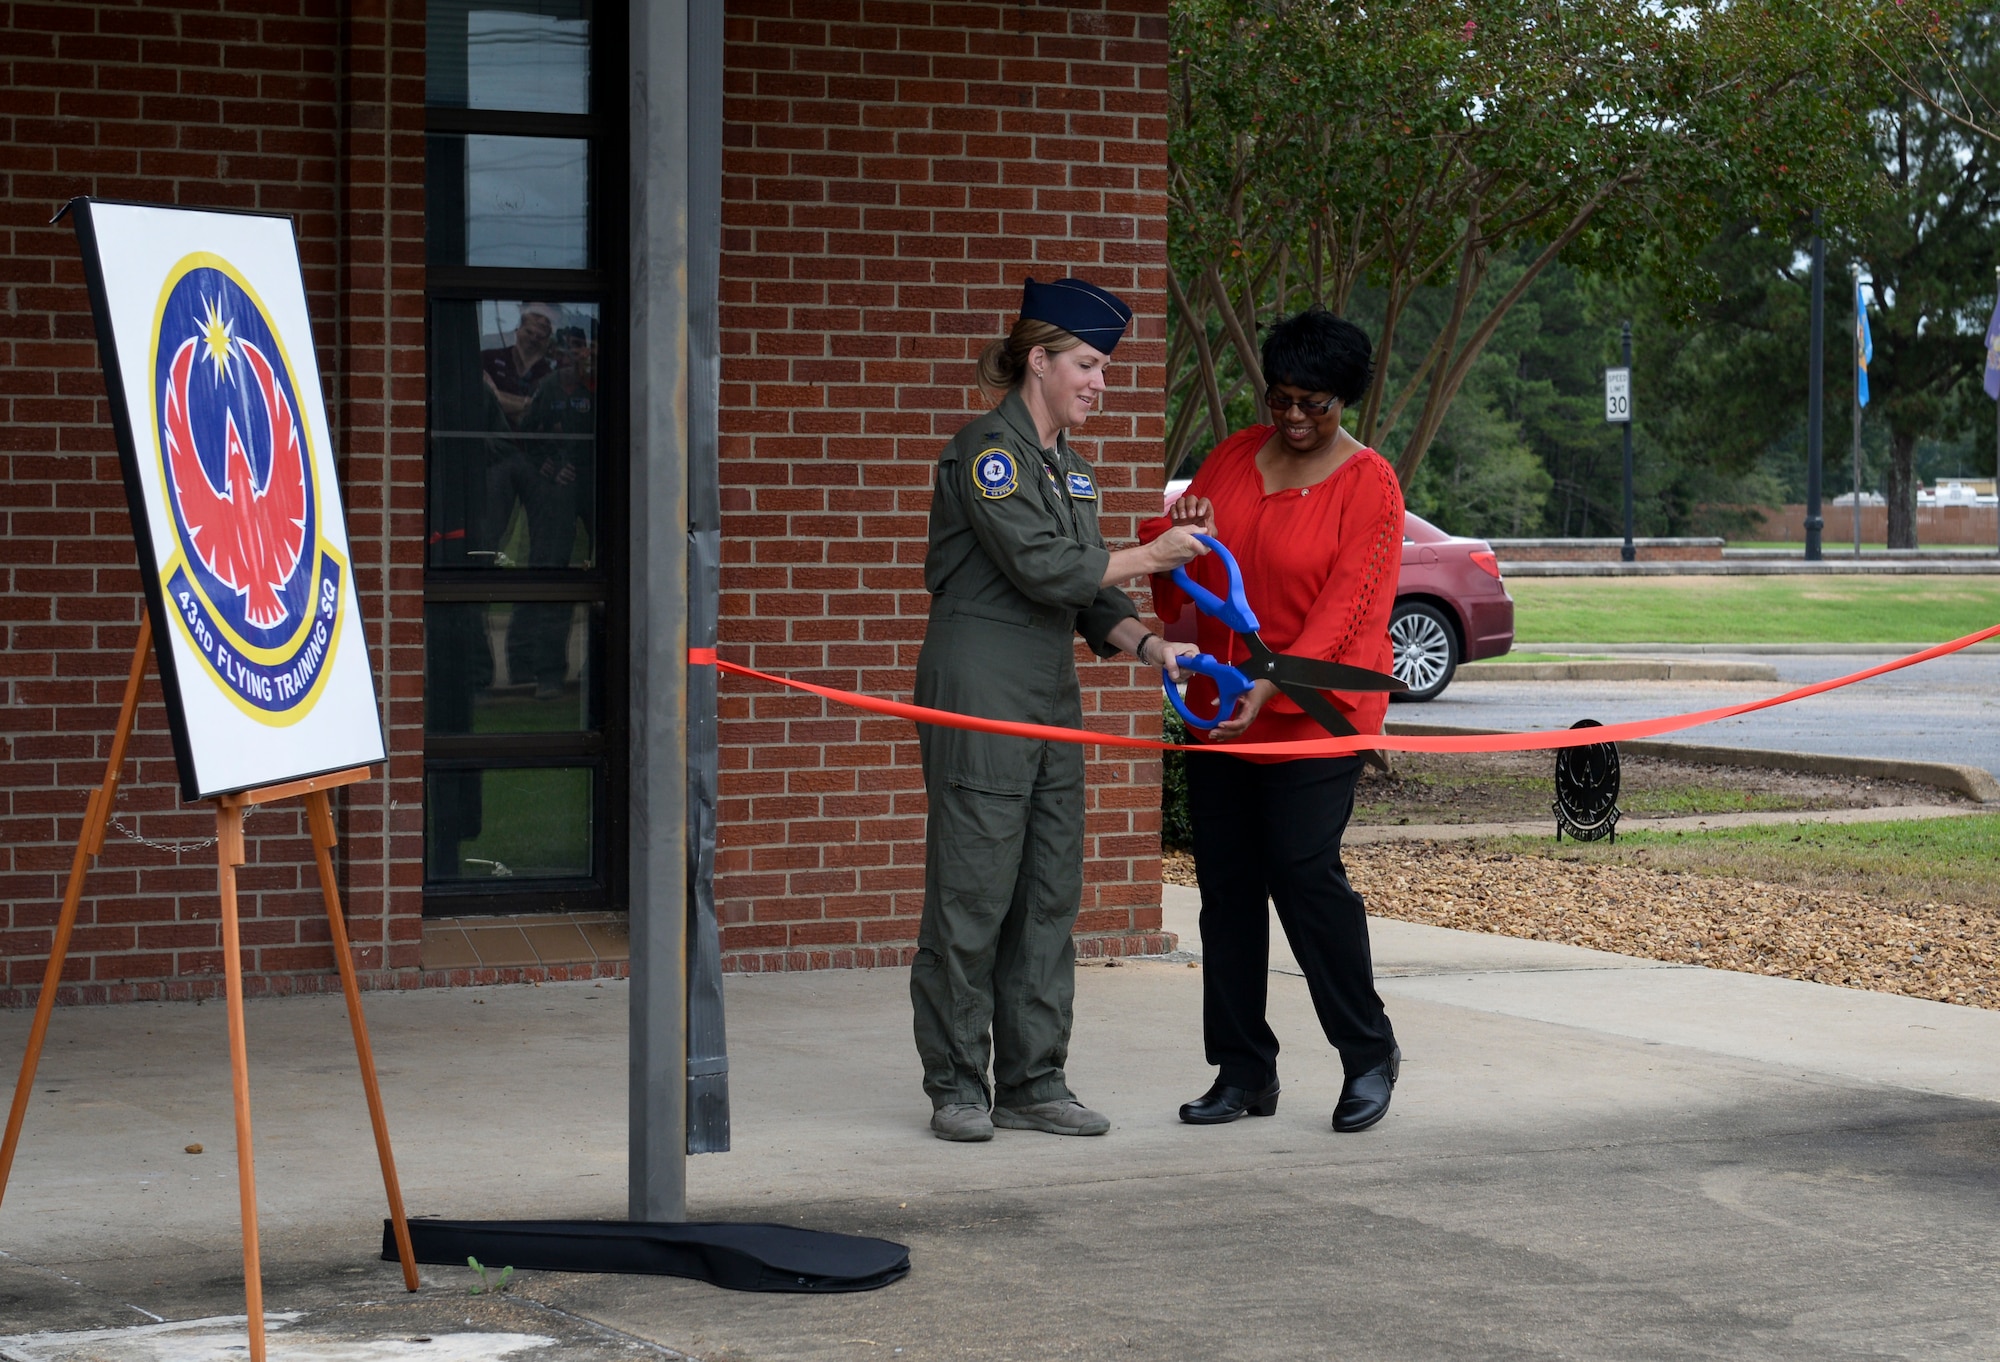 Col. Samantha Weeks, 14th Flying Training Wing commander, and Elaine Hobson, former 43rd Flying Training Squadron secretary, cuts the ribbon at the dedication ceremony Sept. 28, 2018, on Columbus Air Force Base, Mississippi. The 43rd FTS is one of several units at Columbus AFB that aids in creating pilots.  (U.S. Air Force photo by Airman Hannah Bean)